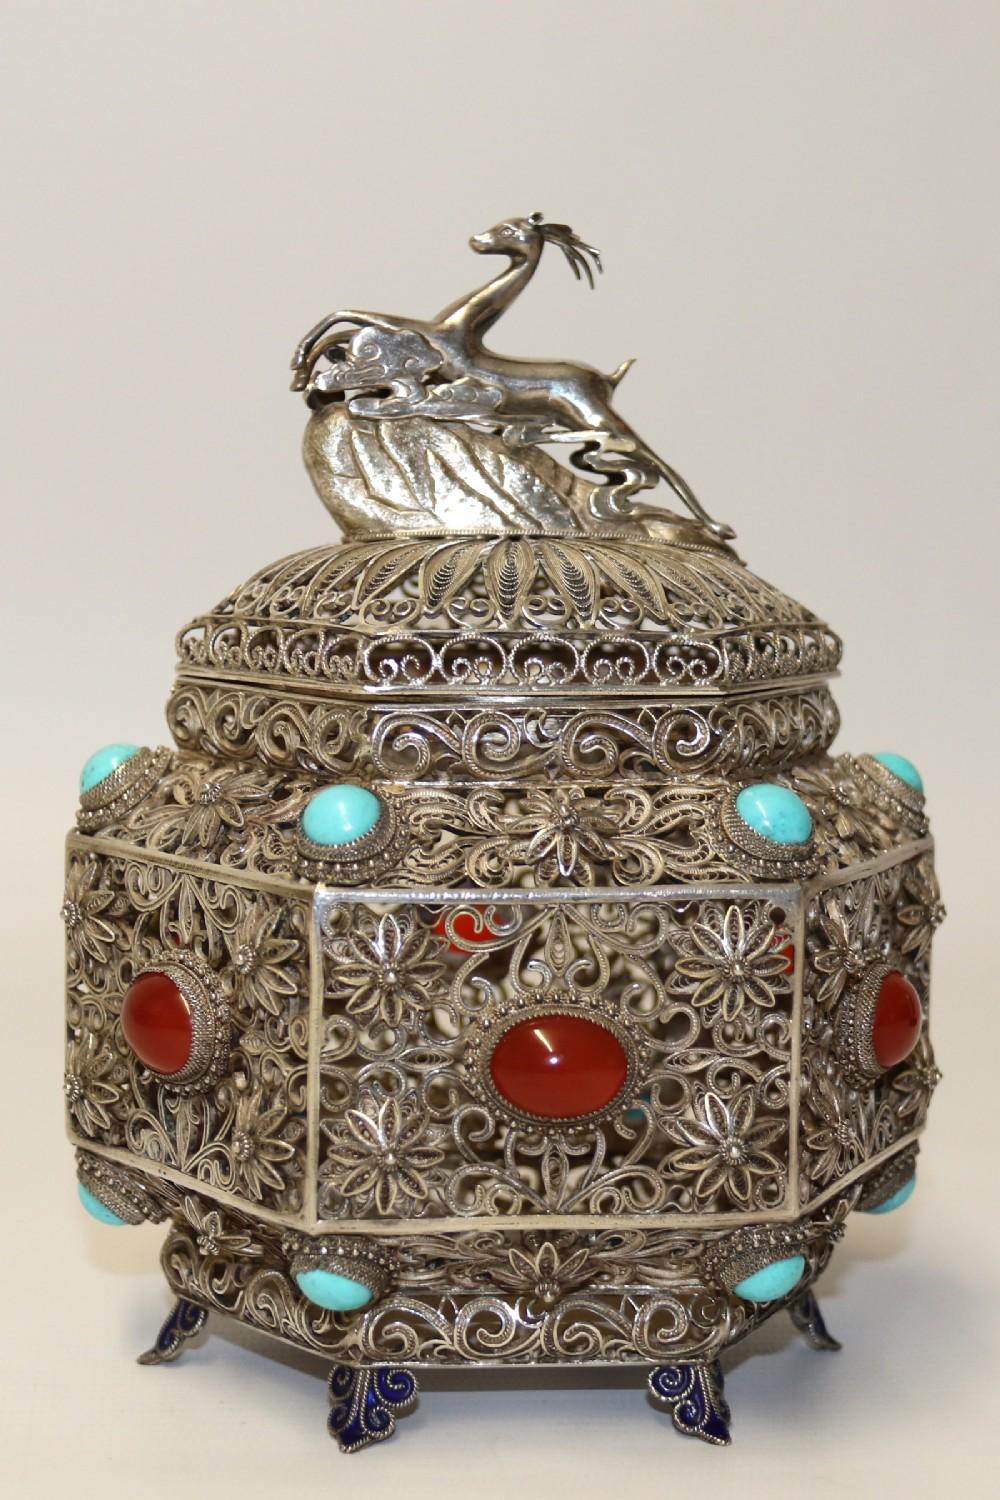 This superb piece of Indian art was created in circa 1900 and is a masterpiece of fine filigree silver work. It is made in two parts of hexagonal form with a push fitting lid which locates perfectly onto the body. It has a finial pediment in the